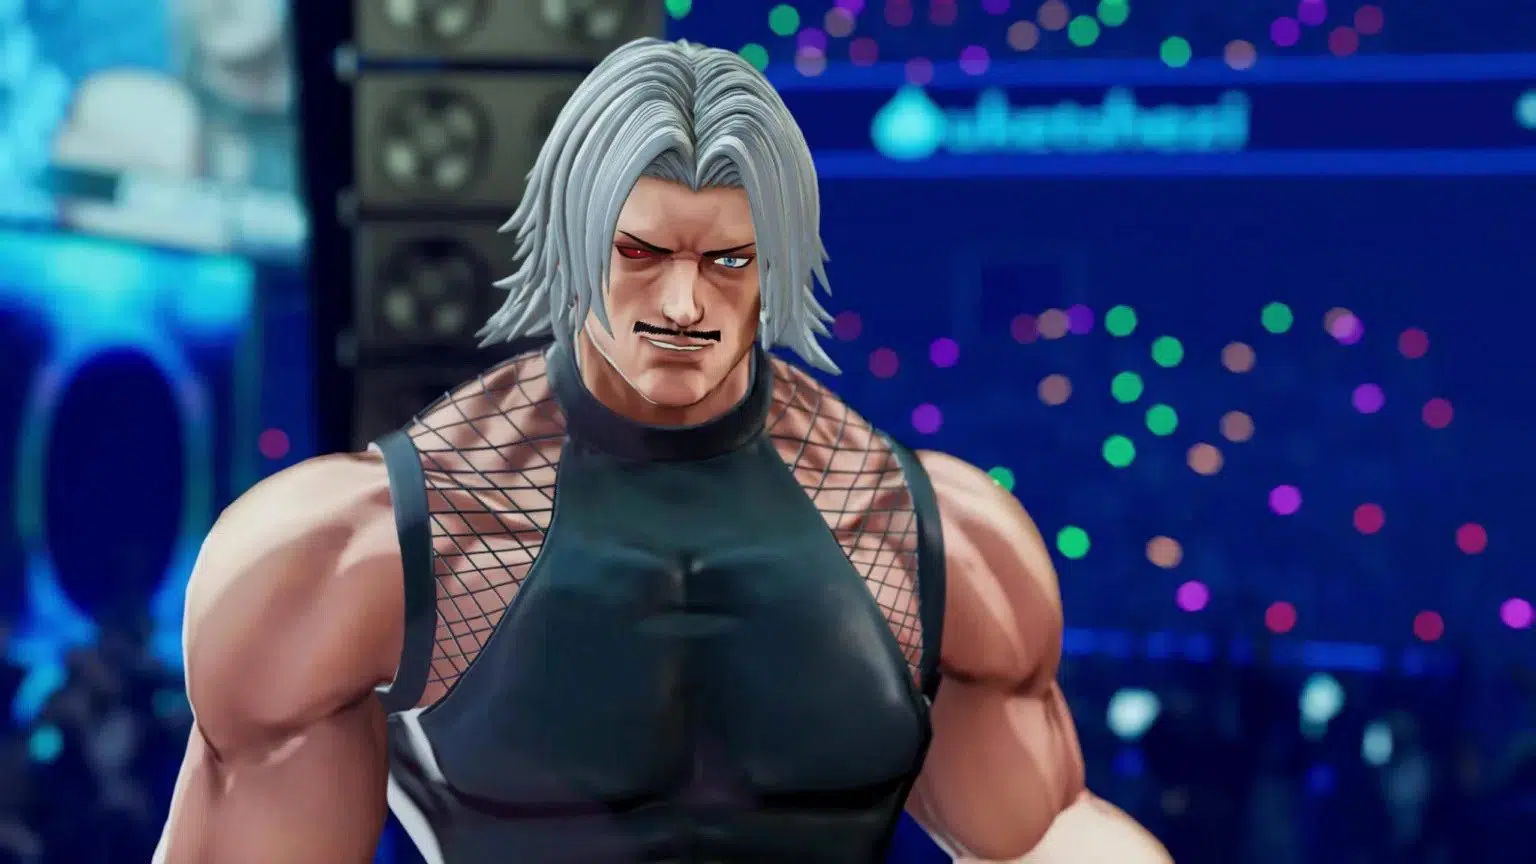 King of Fighters 15 Update 1.21